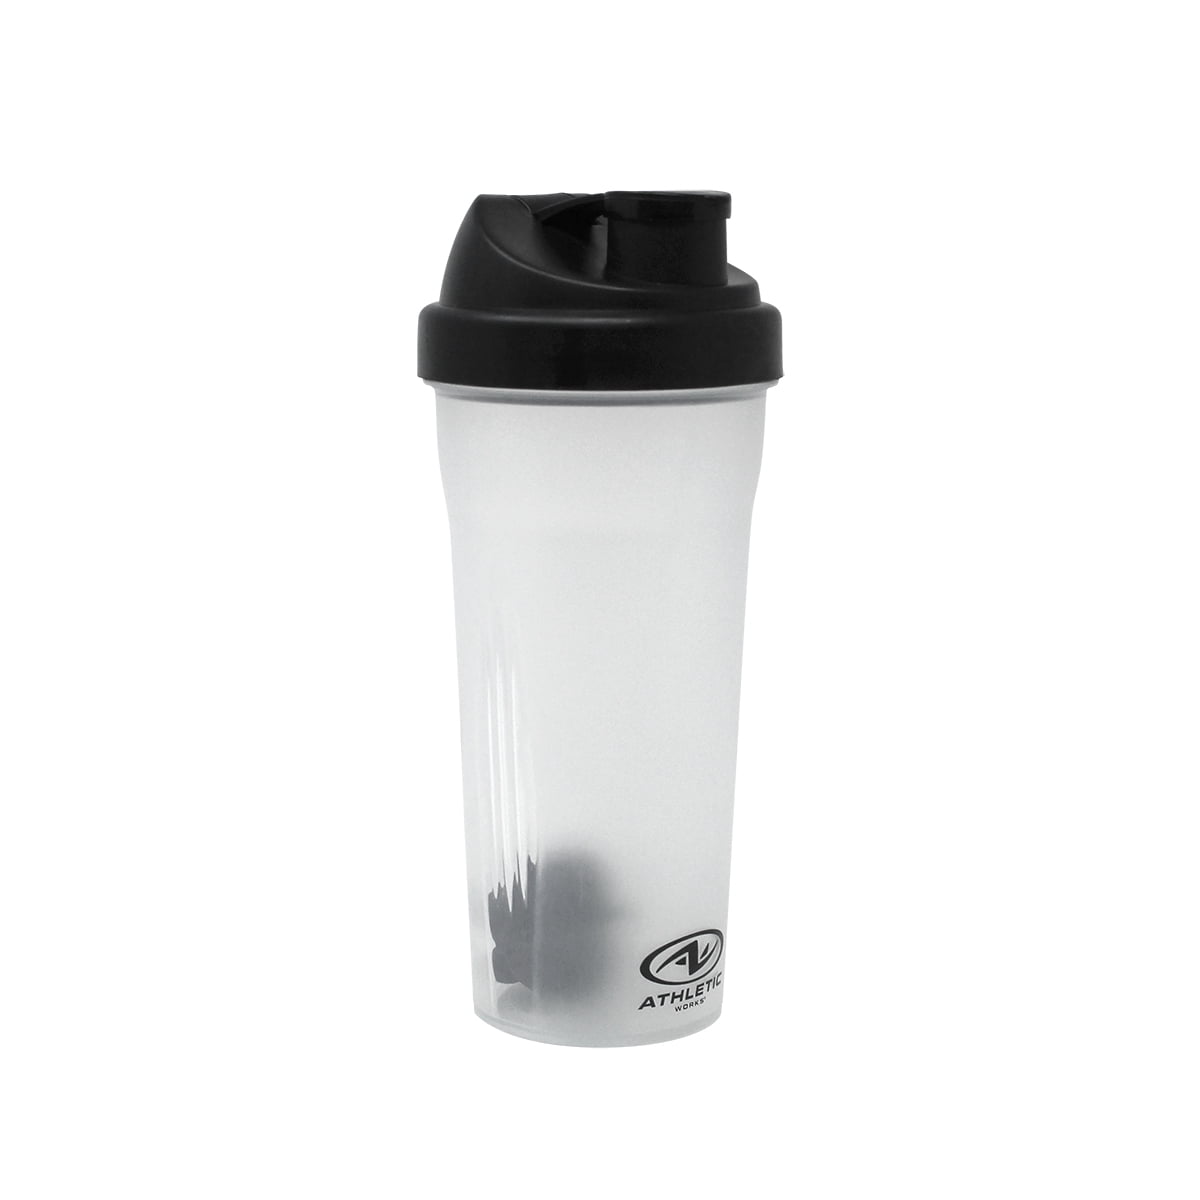 Athletic Works Frost/Black Protein Drink Shaker Bottle W/Mixing Ball, 24 Fluid Ounces